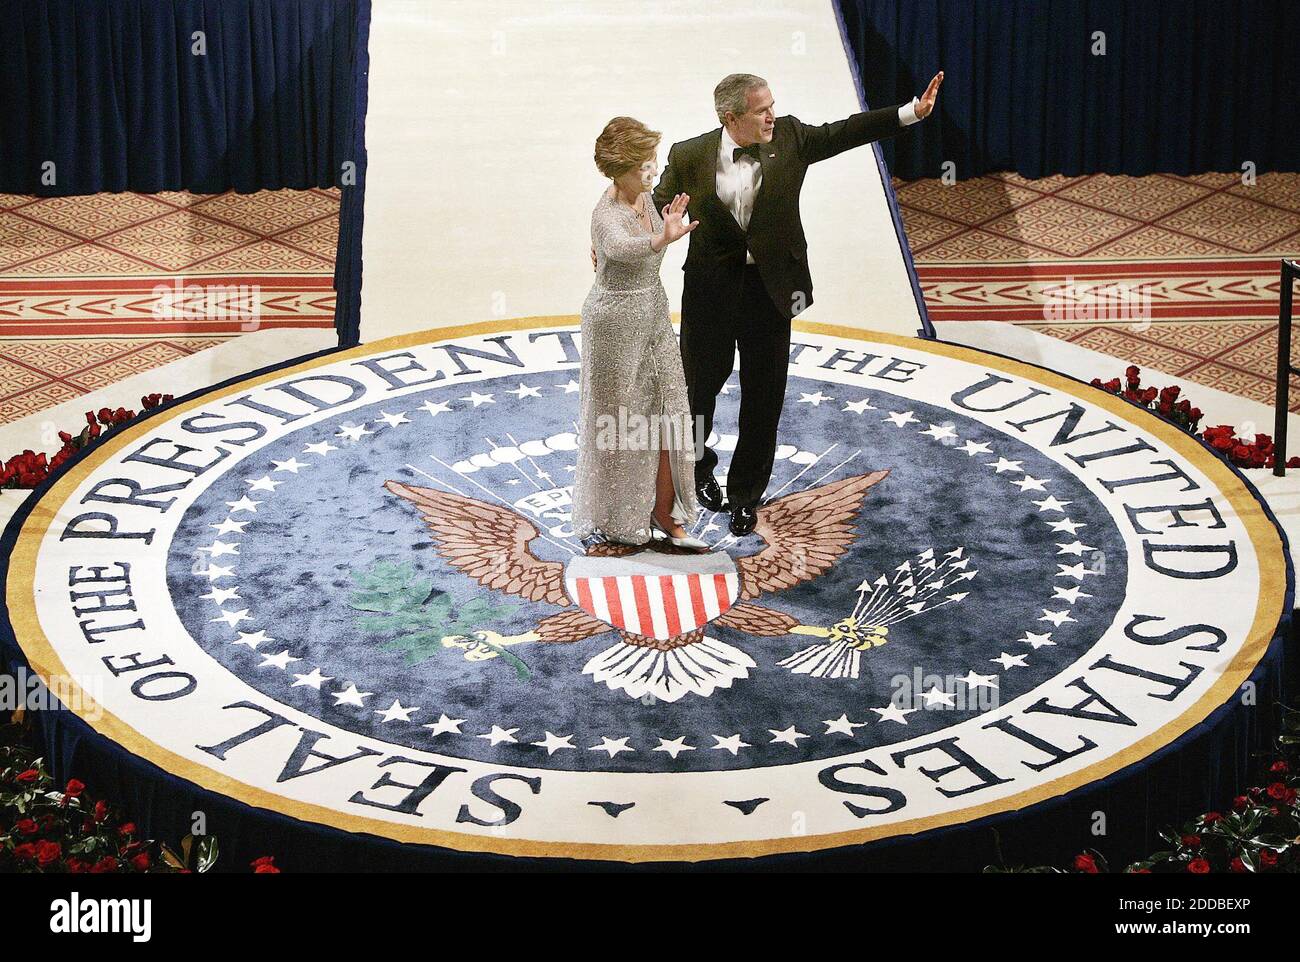 NO FILM, NO VIDEO, NO TV, NO DOCUMENTARY - President George W. Bush and first lady Laura Bush attend the Commander in Chief's Ball in Washington, DC, USA, on January 20, 2005. Photo by Chuck Kennedy/US News Story Slugged/KRT/ABACA. Stock Photo